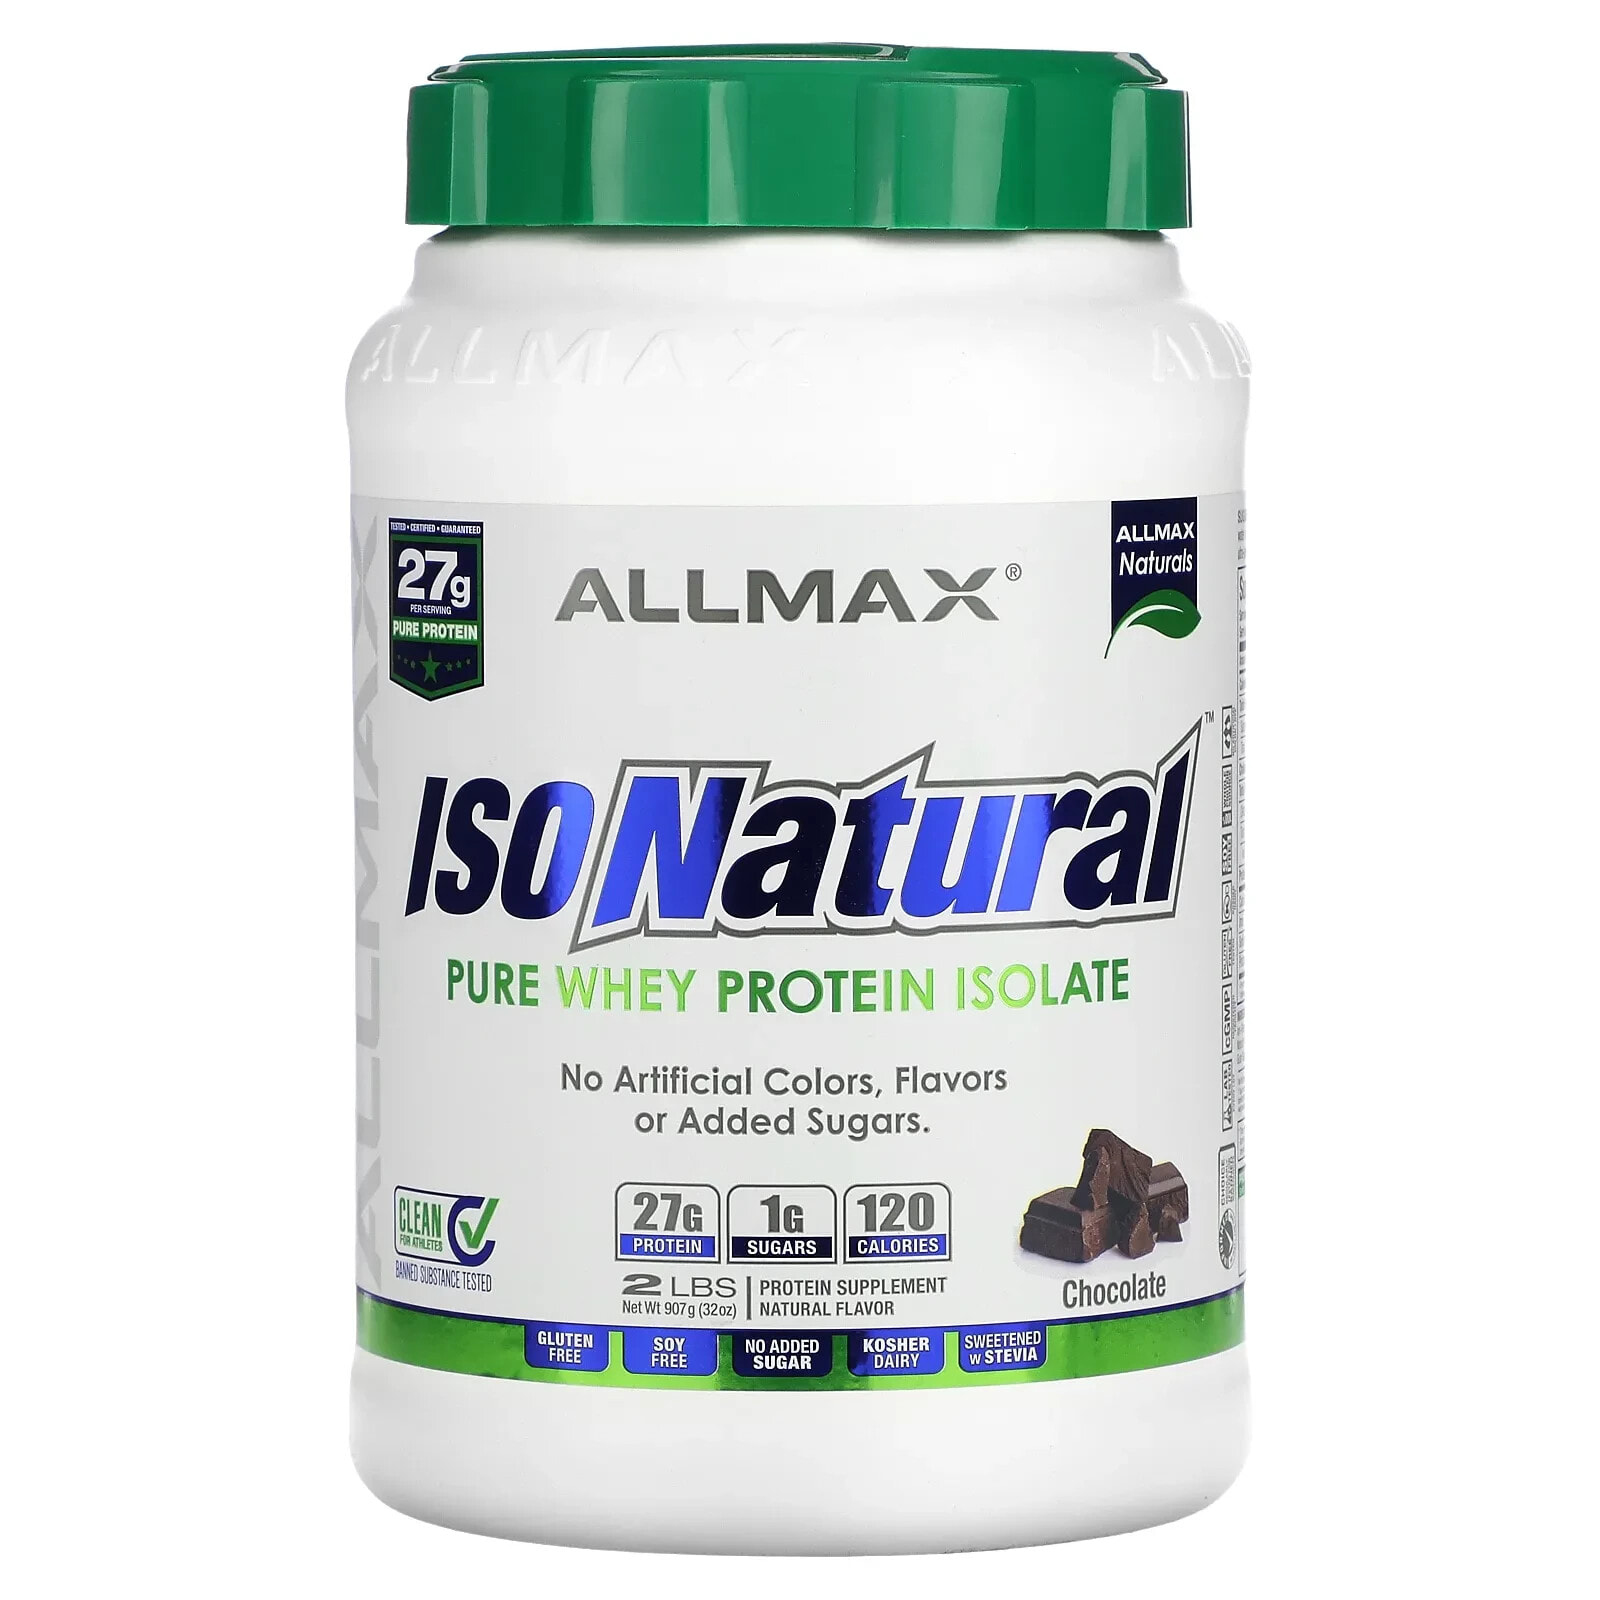 IsoNatural Pure Whey Protein Isolate, Chocolate, 2 lbs (907 g)